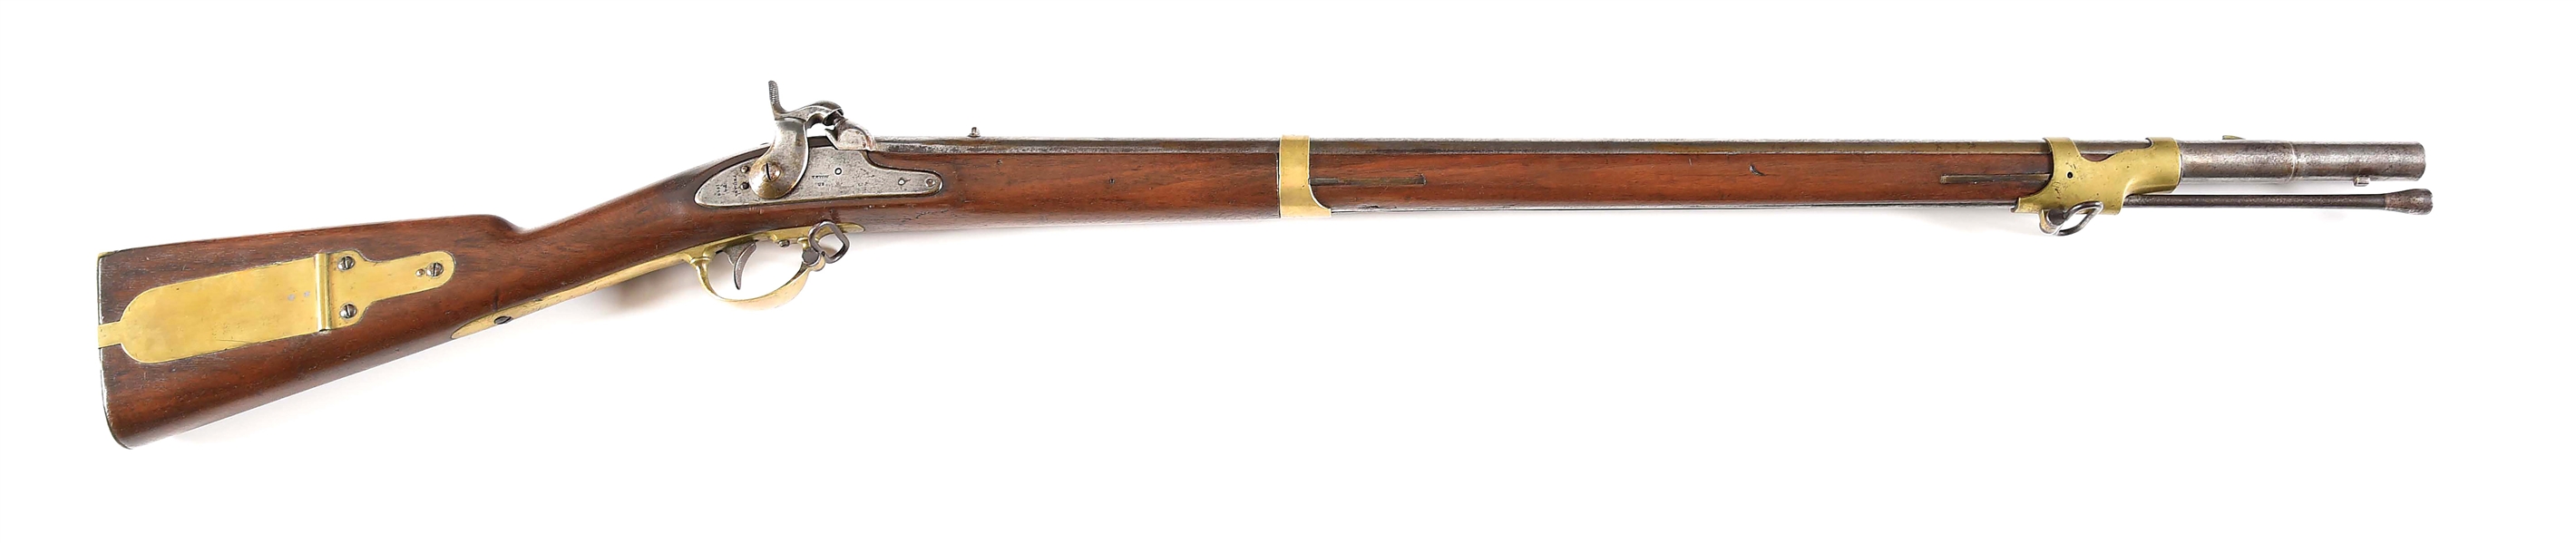 (A) LEMAN ALTERATION TRYON US M1841 MISSISSIPPI RIFLE.